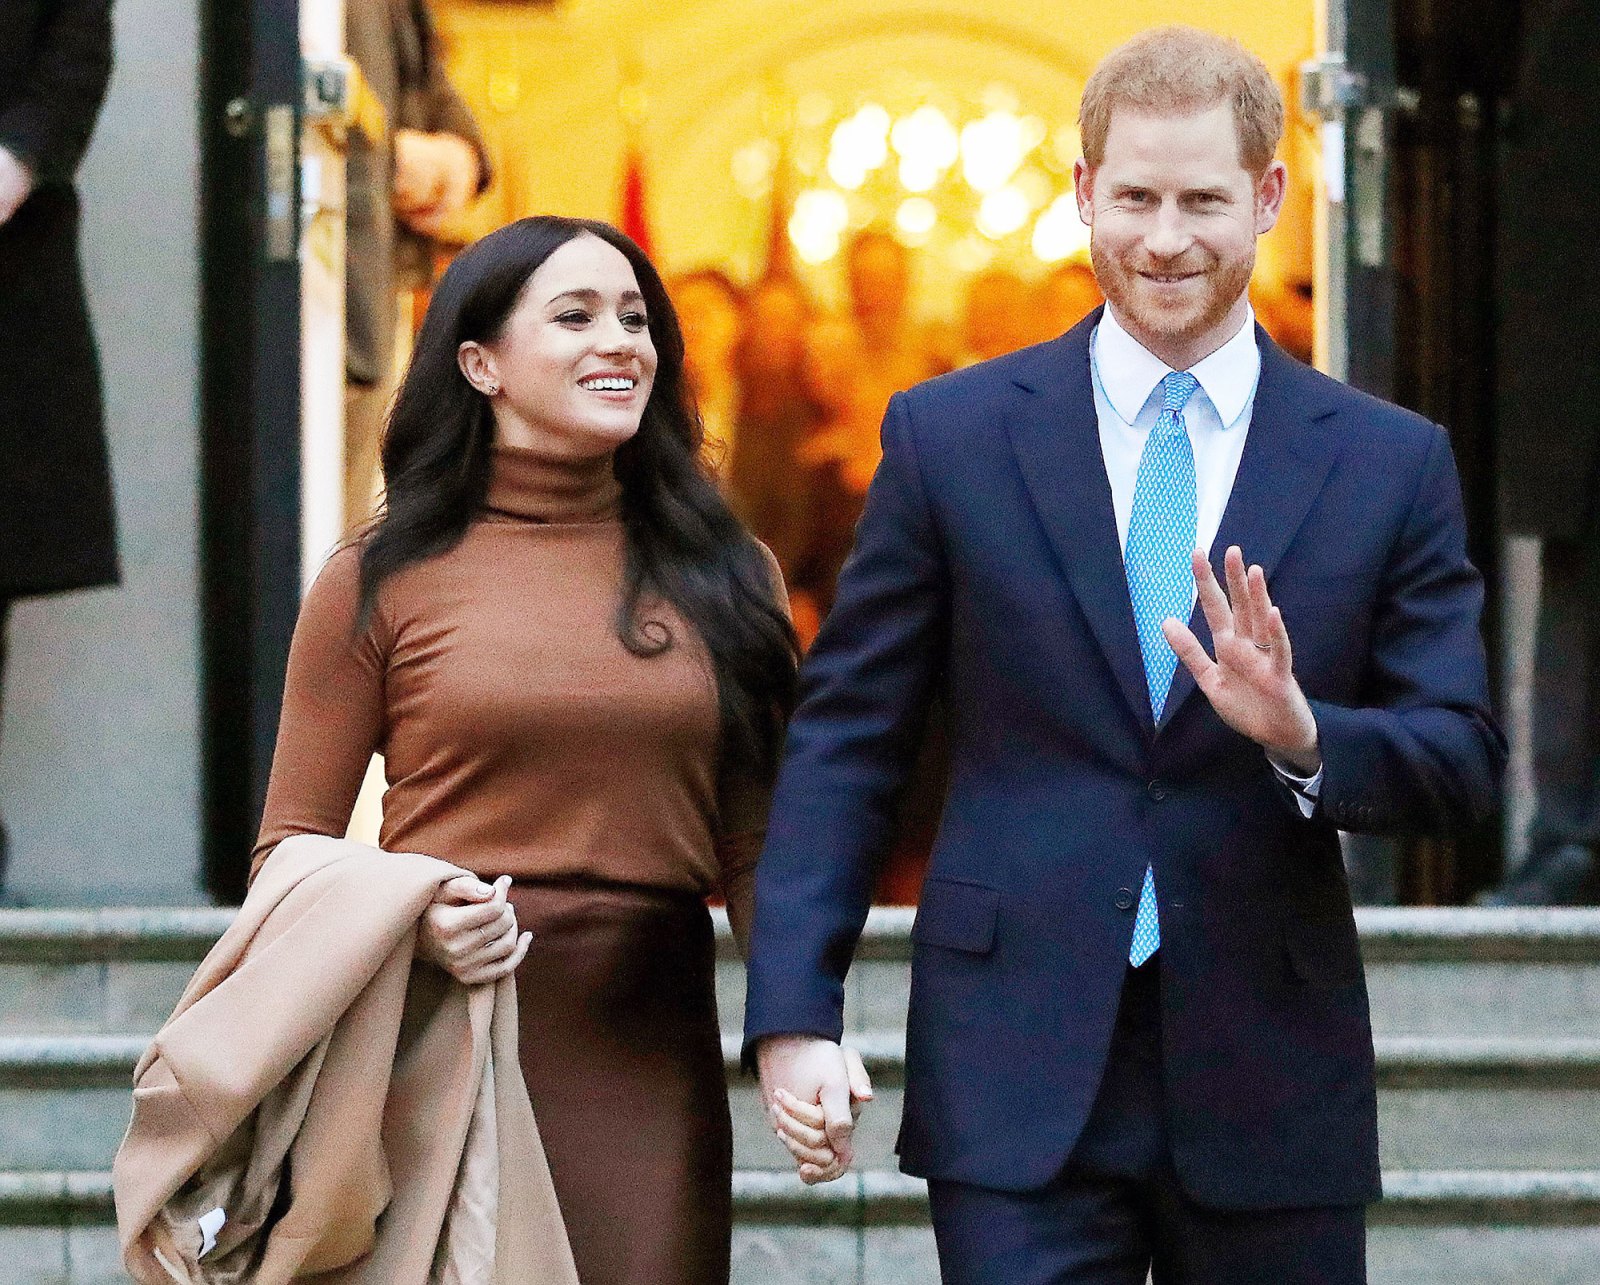 Meghan Markle and Prince Harry visiting Canada House in London How Meghan Markle Hid Her Baby Bump Ahead of 2nd Pregnancy Announcement